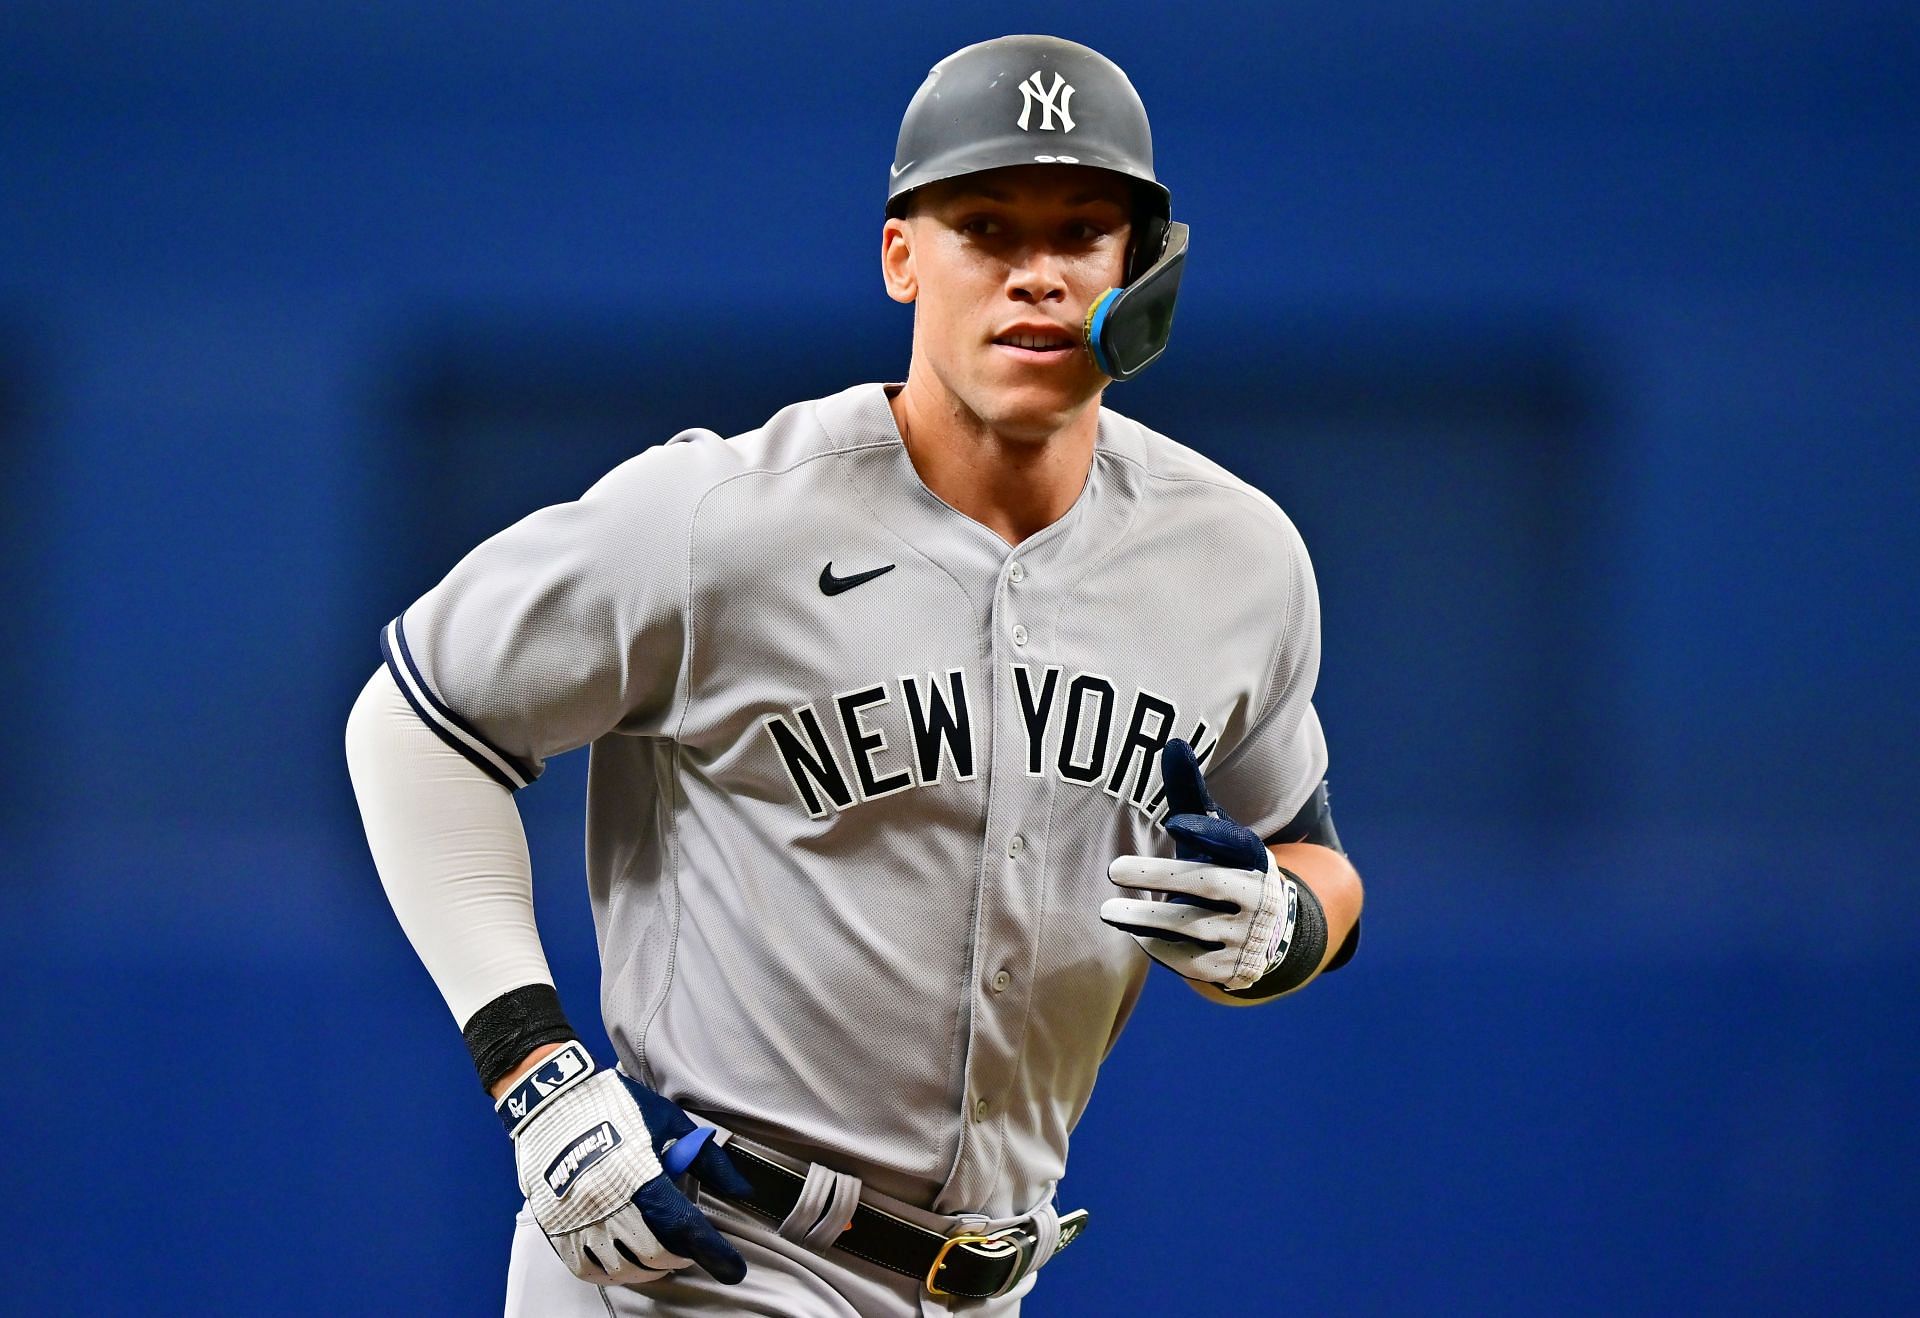 Aaron Judge rounds the bases on a 450-foot solo home run in the first inning against the Tampa Bay Rays at Tropicana Field.